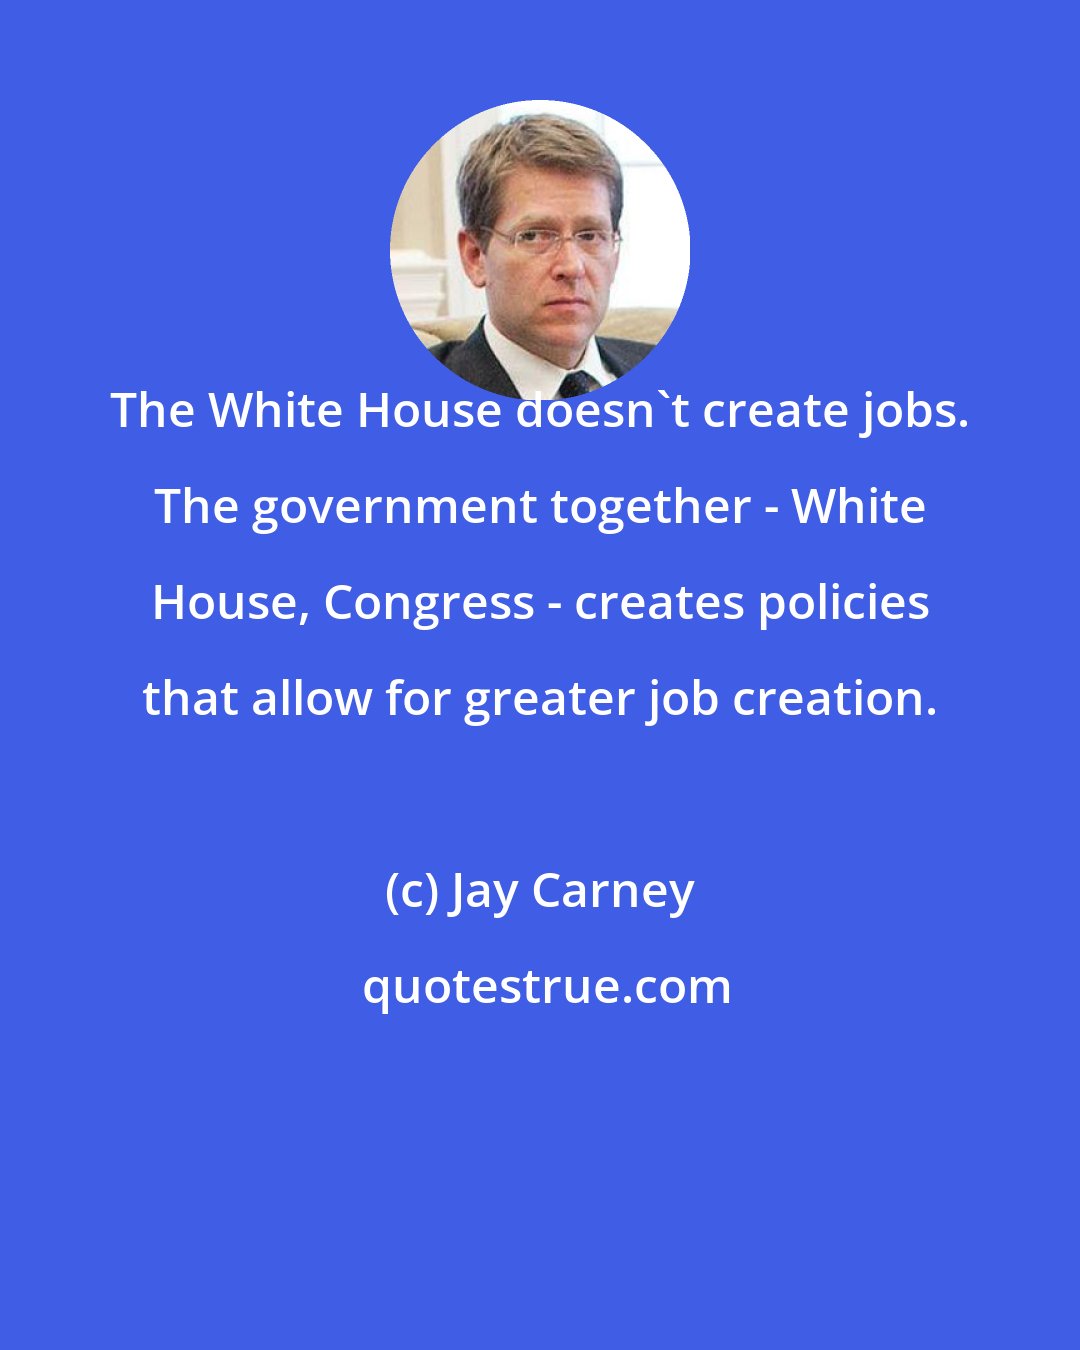 Jay Carney: The White House doesn't create jobs. The government together - White House, Congress - creates policies that allow for greater job creation.